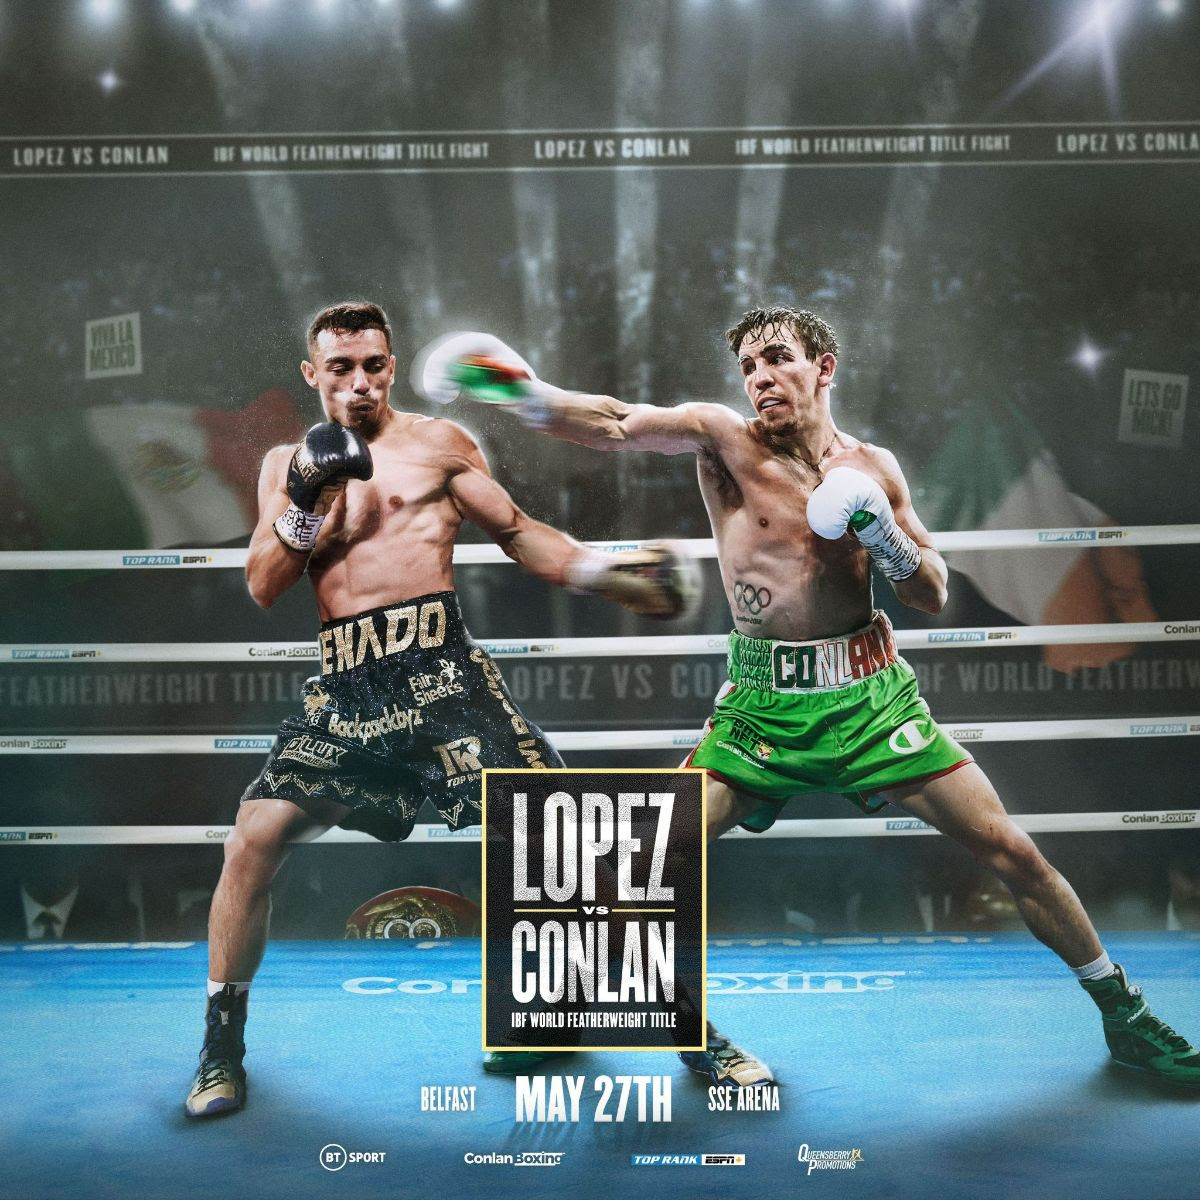 Michael Conlan To Challenge Luis Alberto Lopez For IBF World Title In Belfast, May 27th